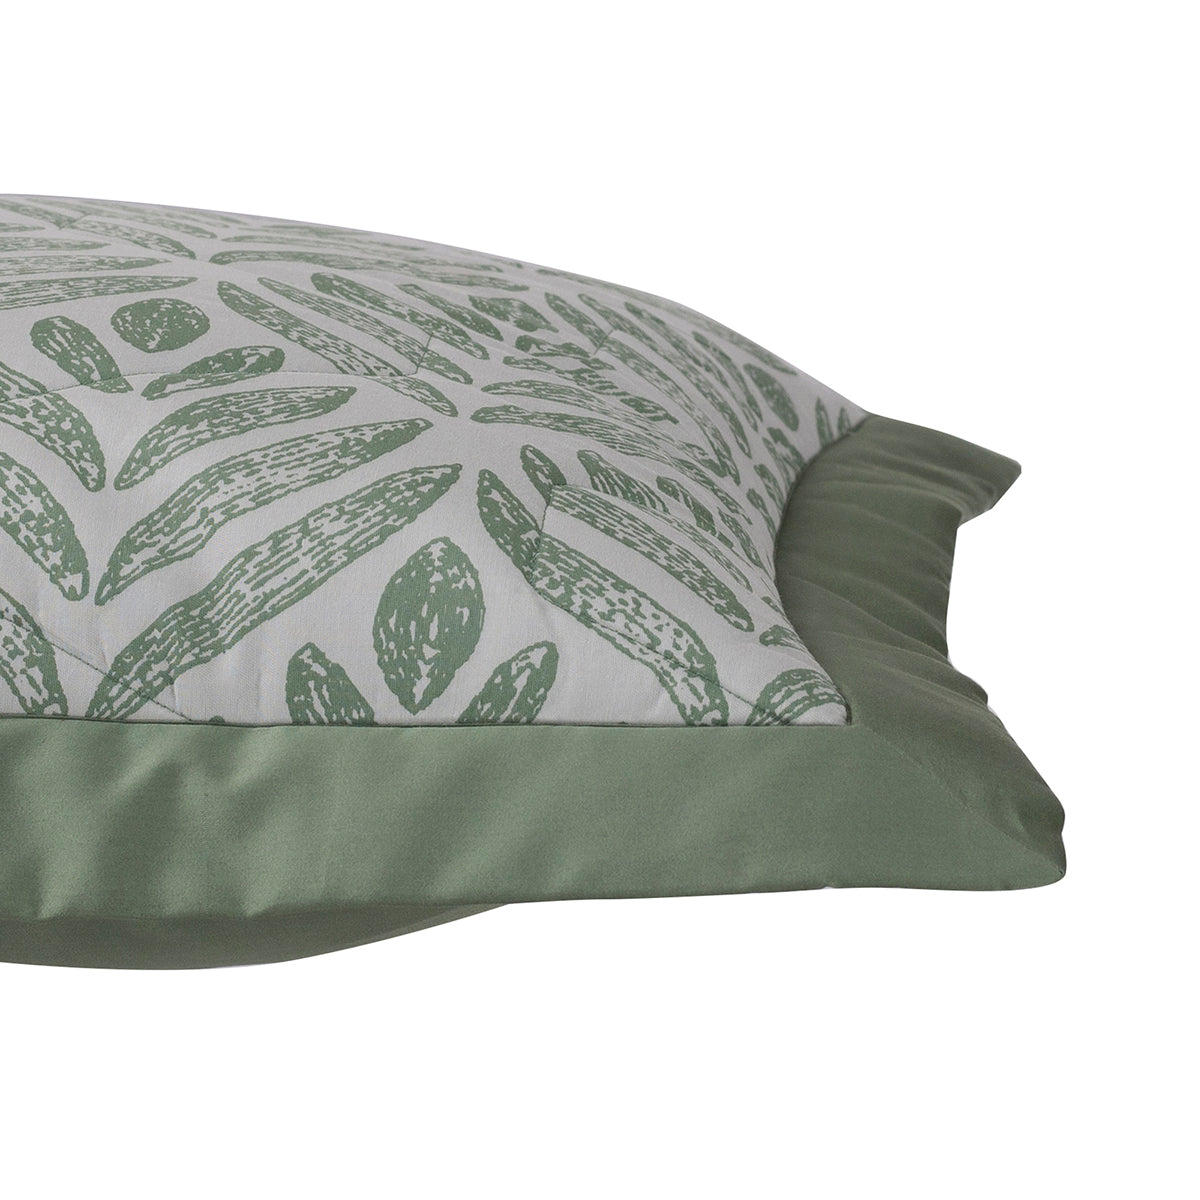 Global Atelier Petal Touch Green Machine Quilted 2PC Pillow Sham Set